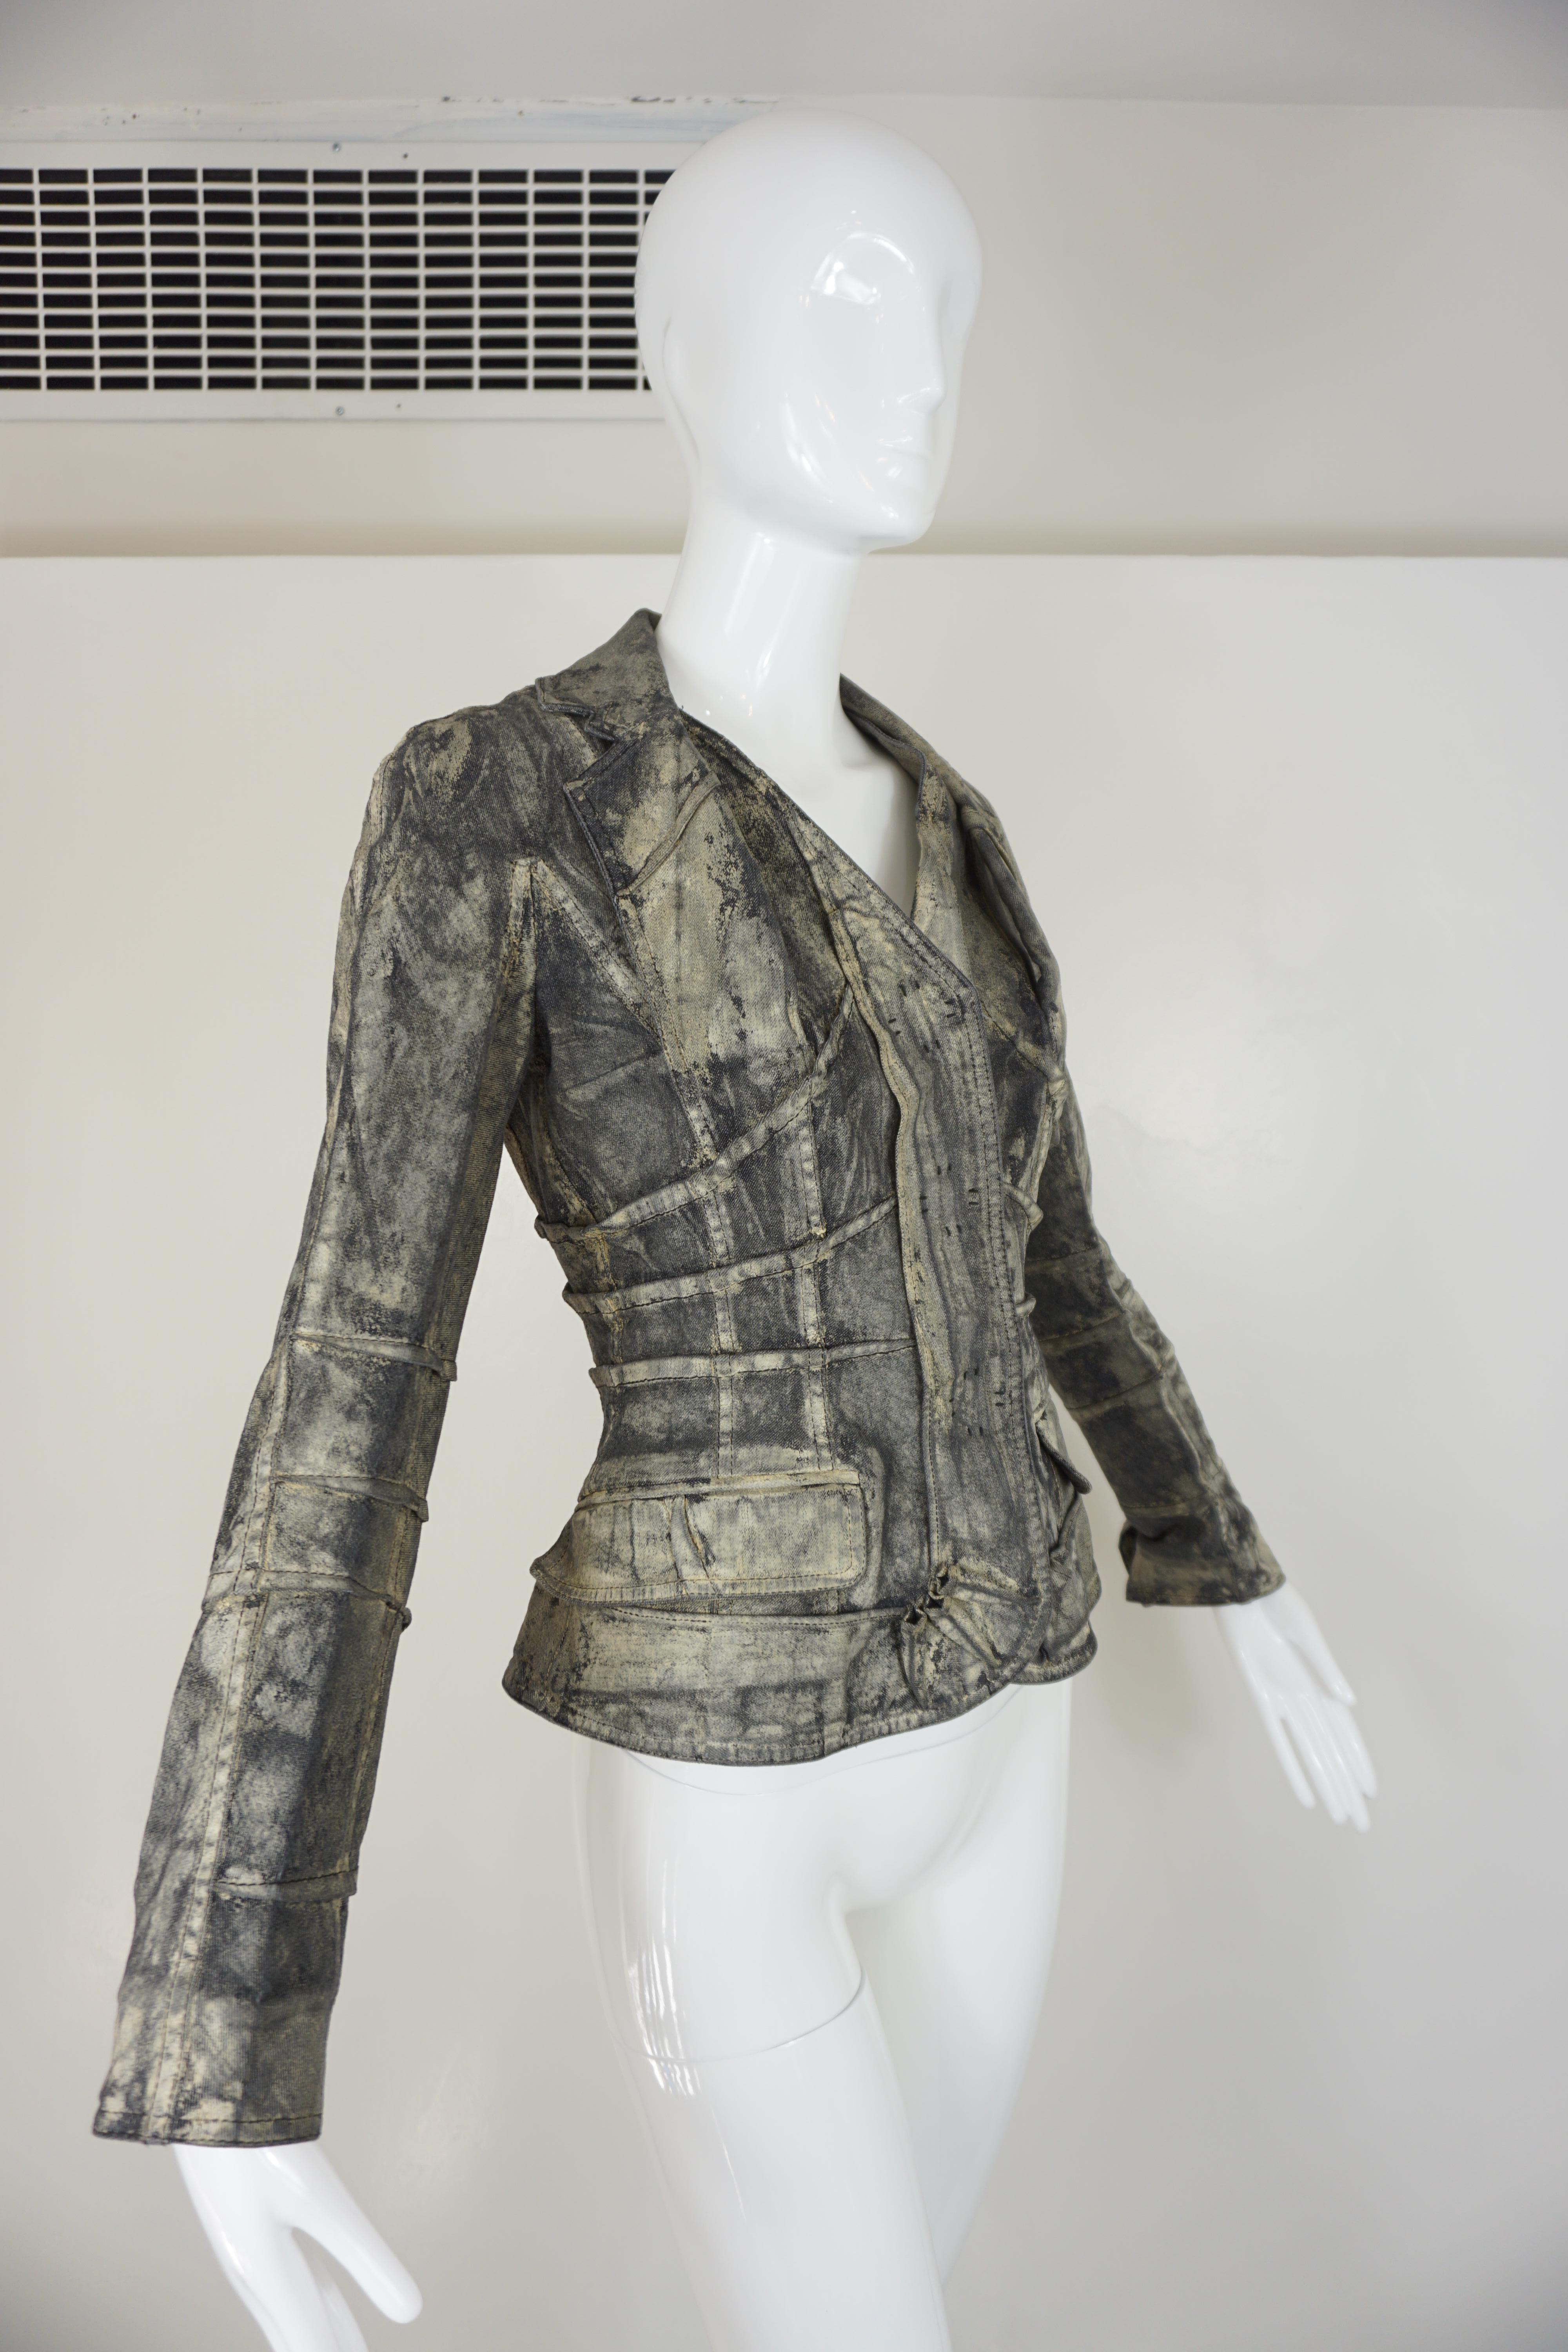 Christian Dior Boutique jacket, from the Fall 2006 Ready-to-Wear, is featured in distressed blackened cream overlay washed denim with welted corset tailoring throughout, creating a peplum design. The jacket features large Christian Dior labeled snap